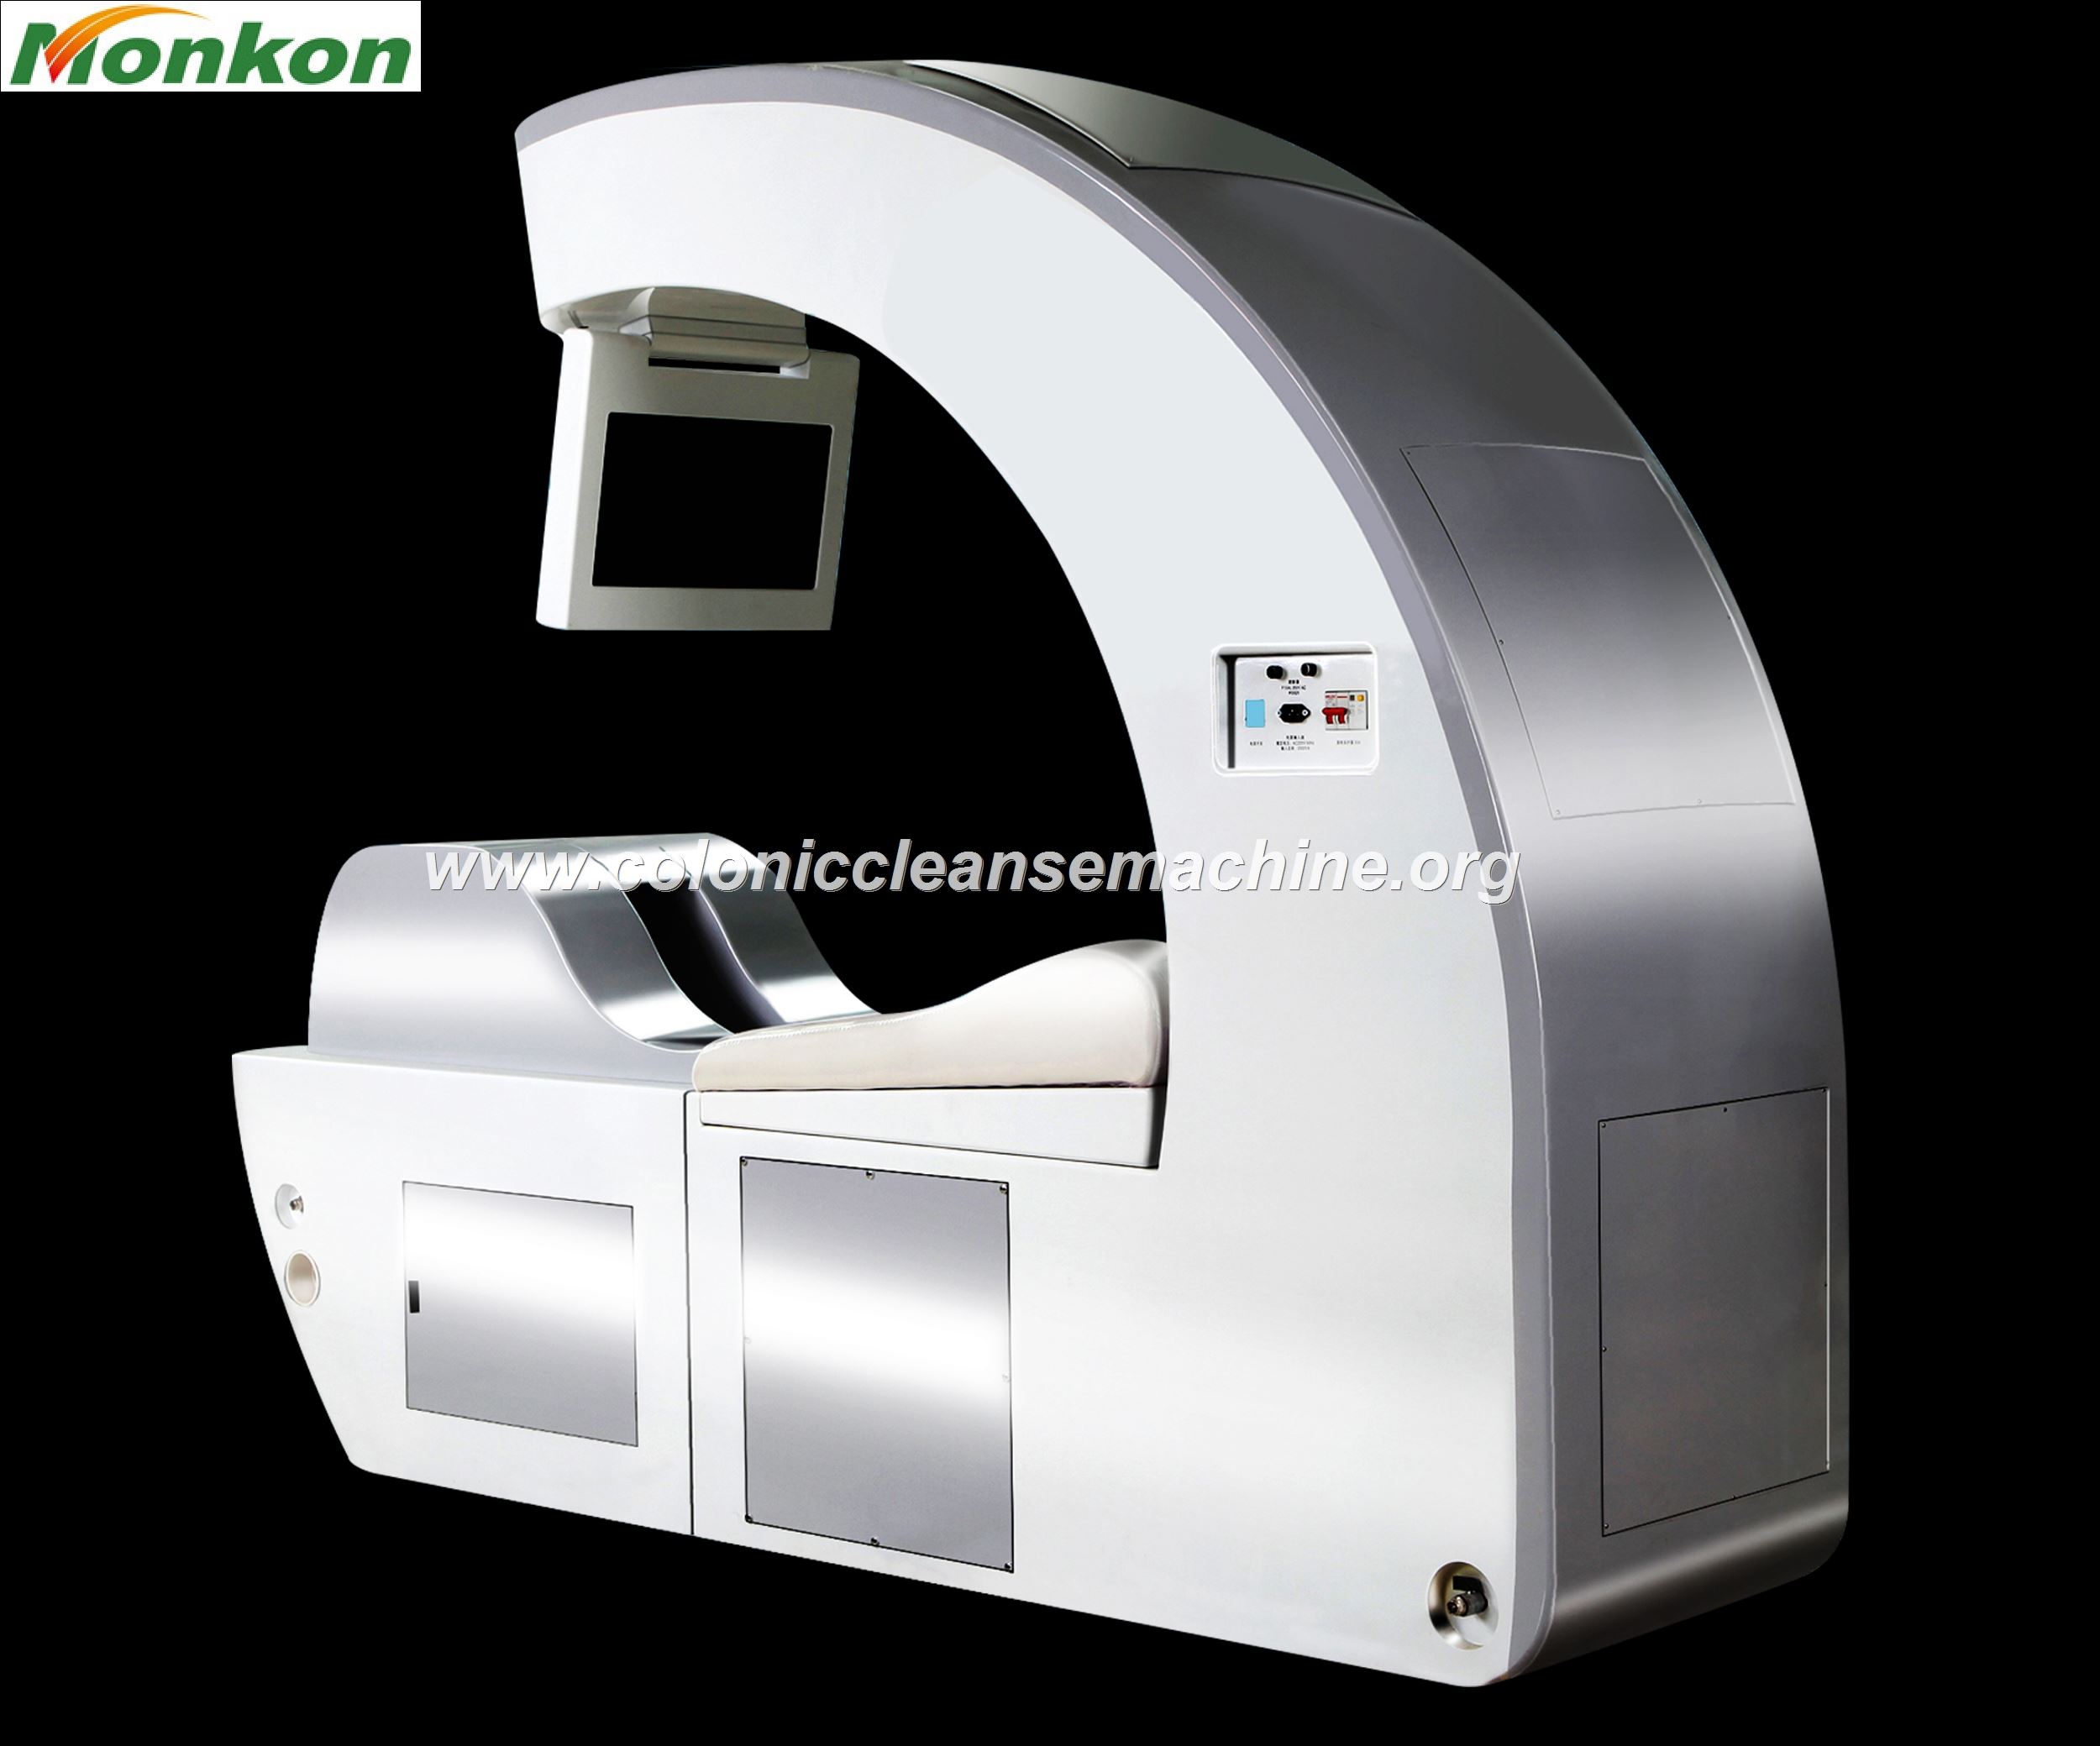 Latest MAIKONG New Colonic Machine for Sale